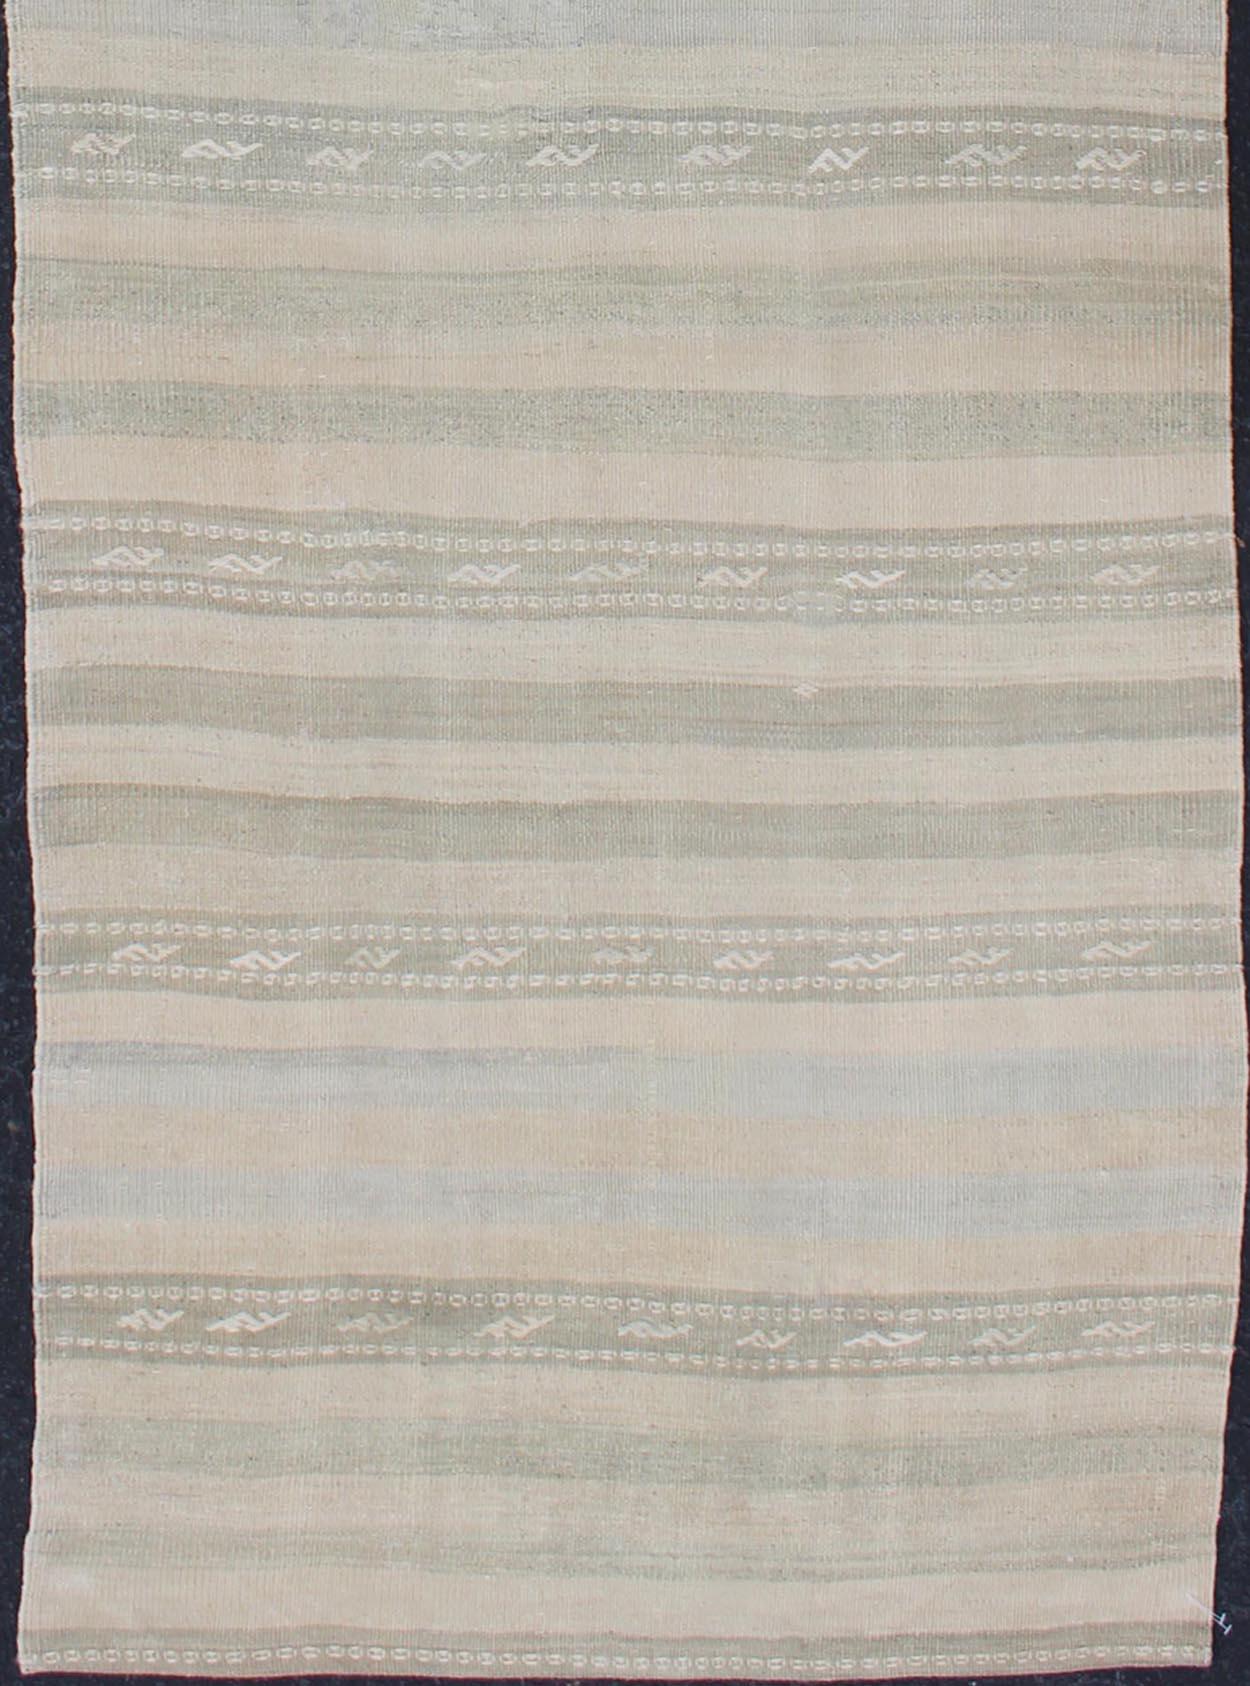 Stripe design Kilim runner in cream, light green, taupe, rug EN-179274, country of origin / type: Turkey / Kilim, circa 1950

This flat-woven Kilim runner from Turkey features an exciting composition consisting of stripes rendered in natural tones